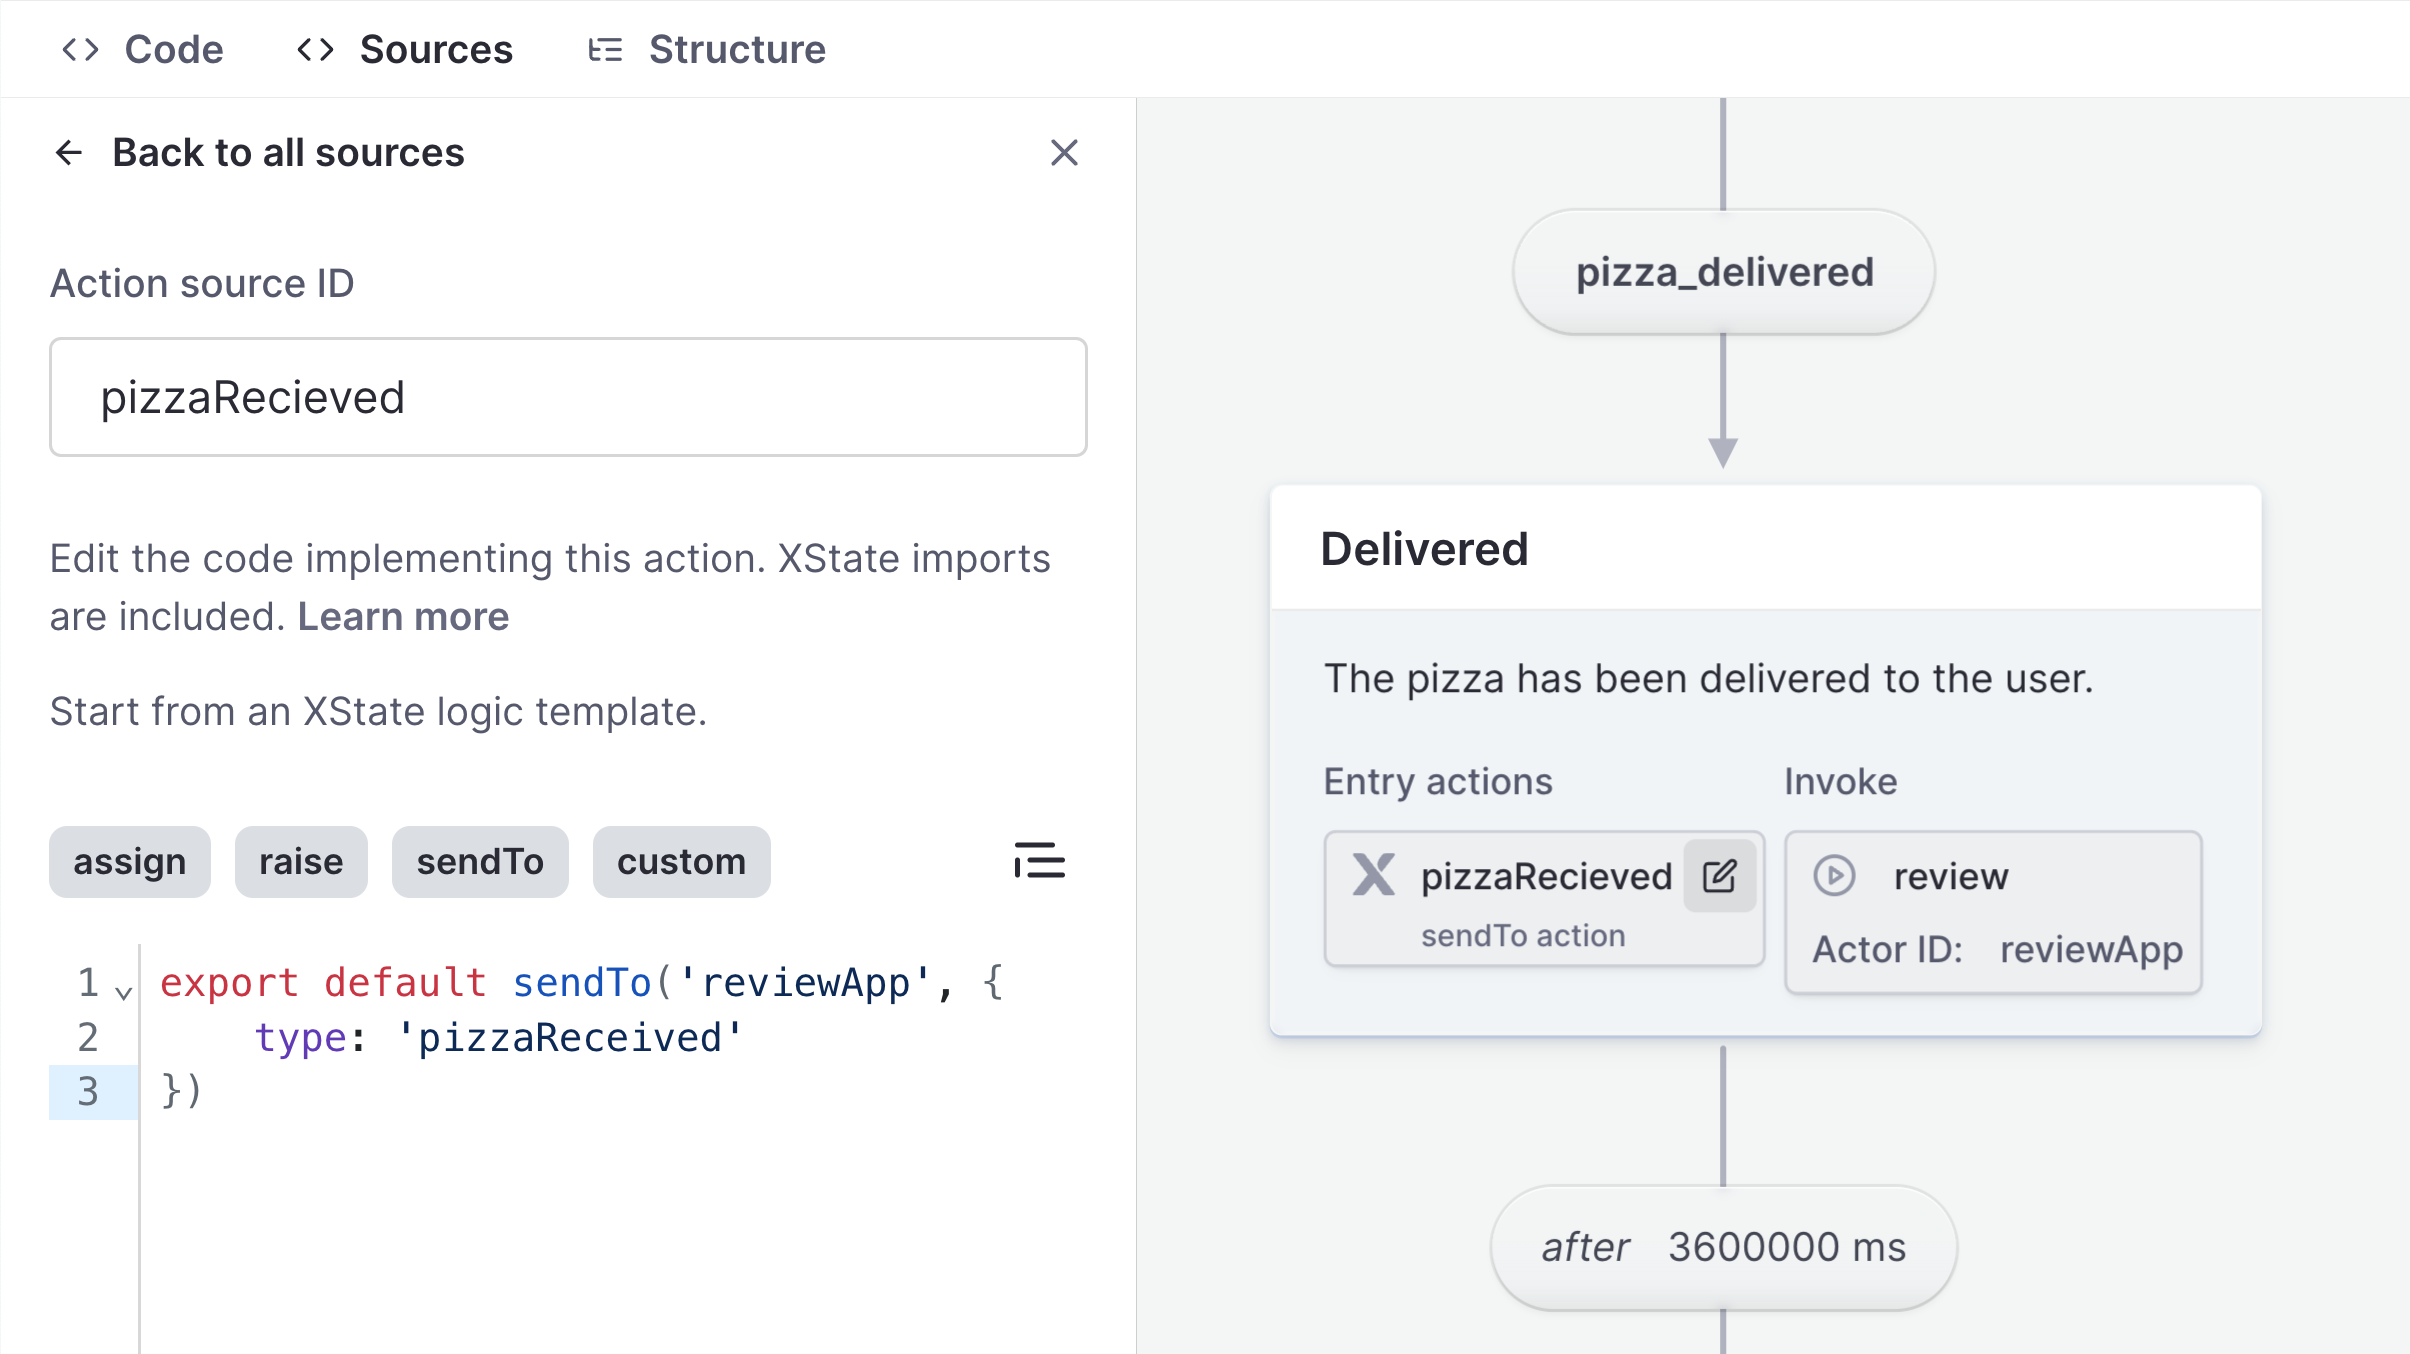 The sources panel open for a pizzaRecieced entry action. In the source code, the sendTo action is being used to send an event of pizzaRecieved to the reviewApp actor.